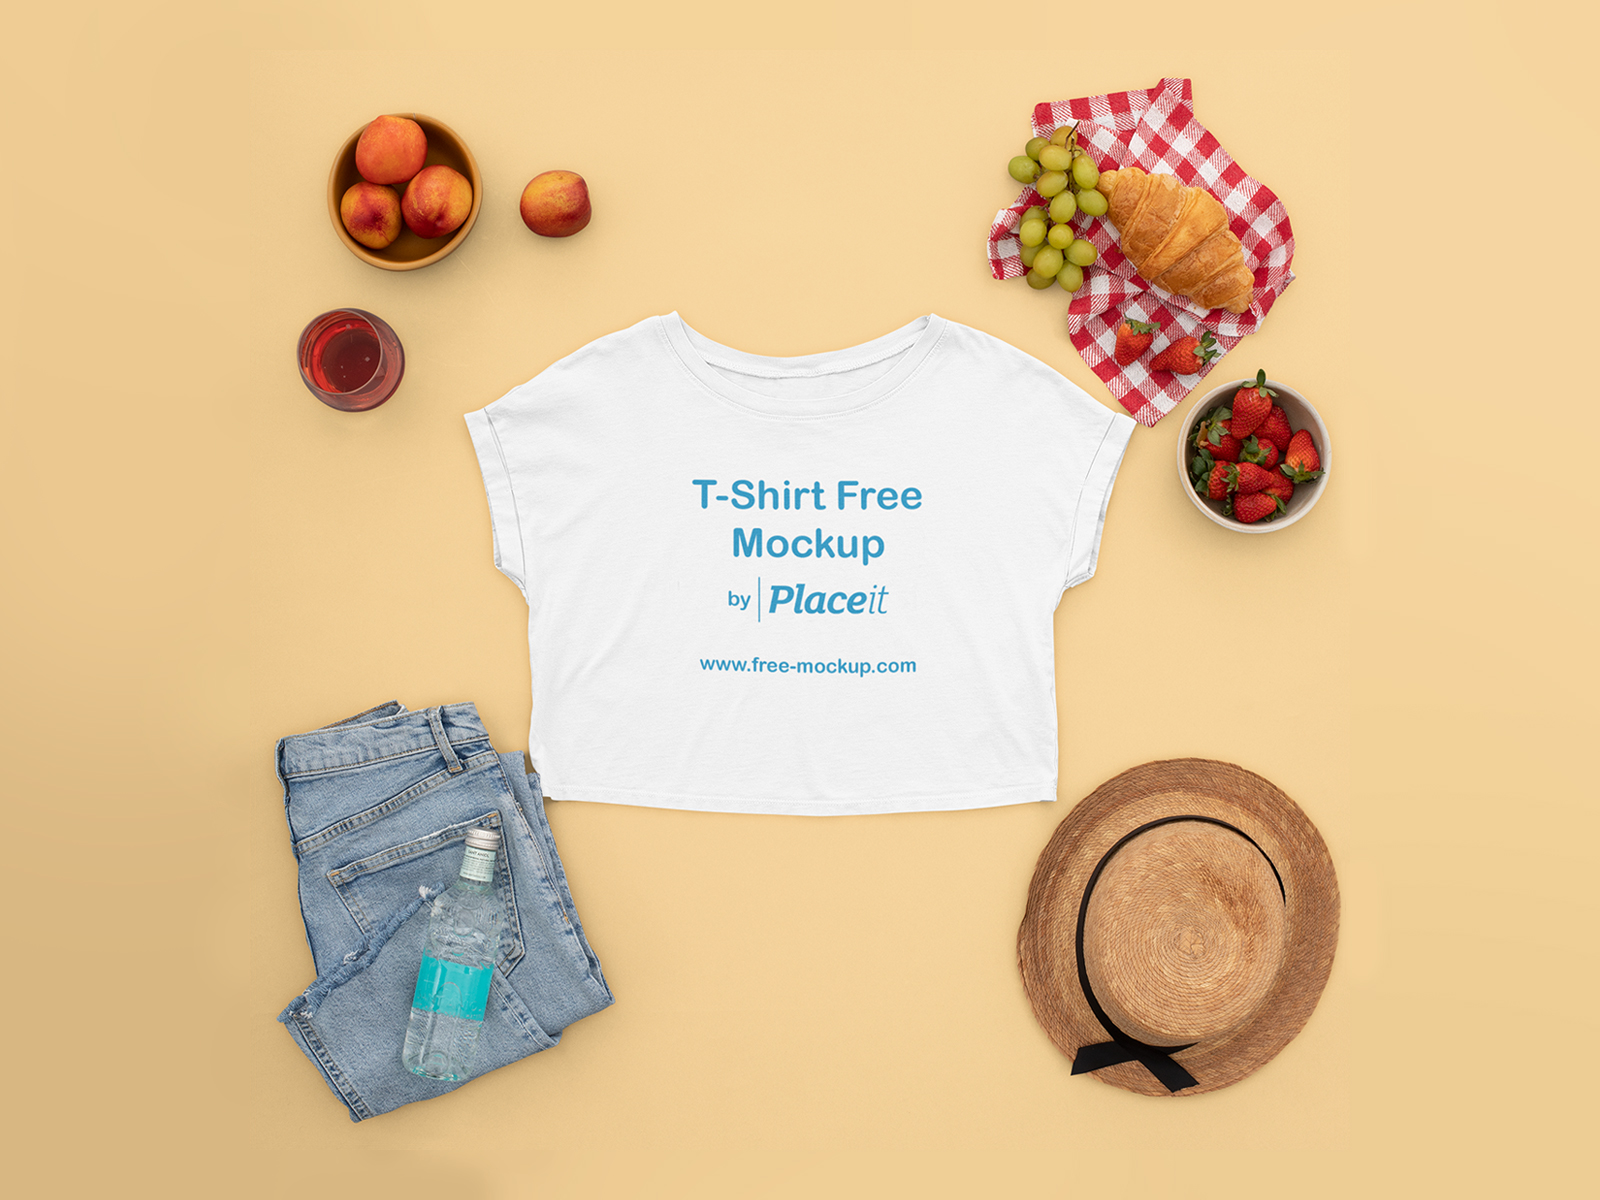 T Shirt Crop Top Placeit Free Mockup Featuring A Woman S Picnic Outfit Free Mockup